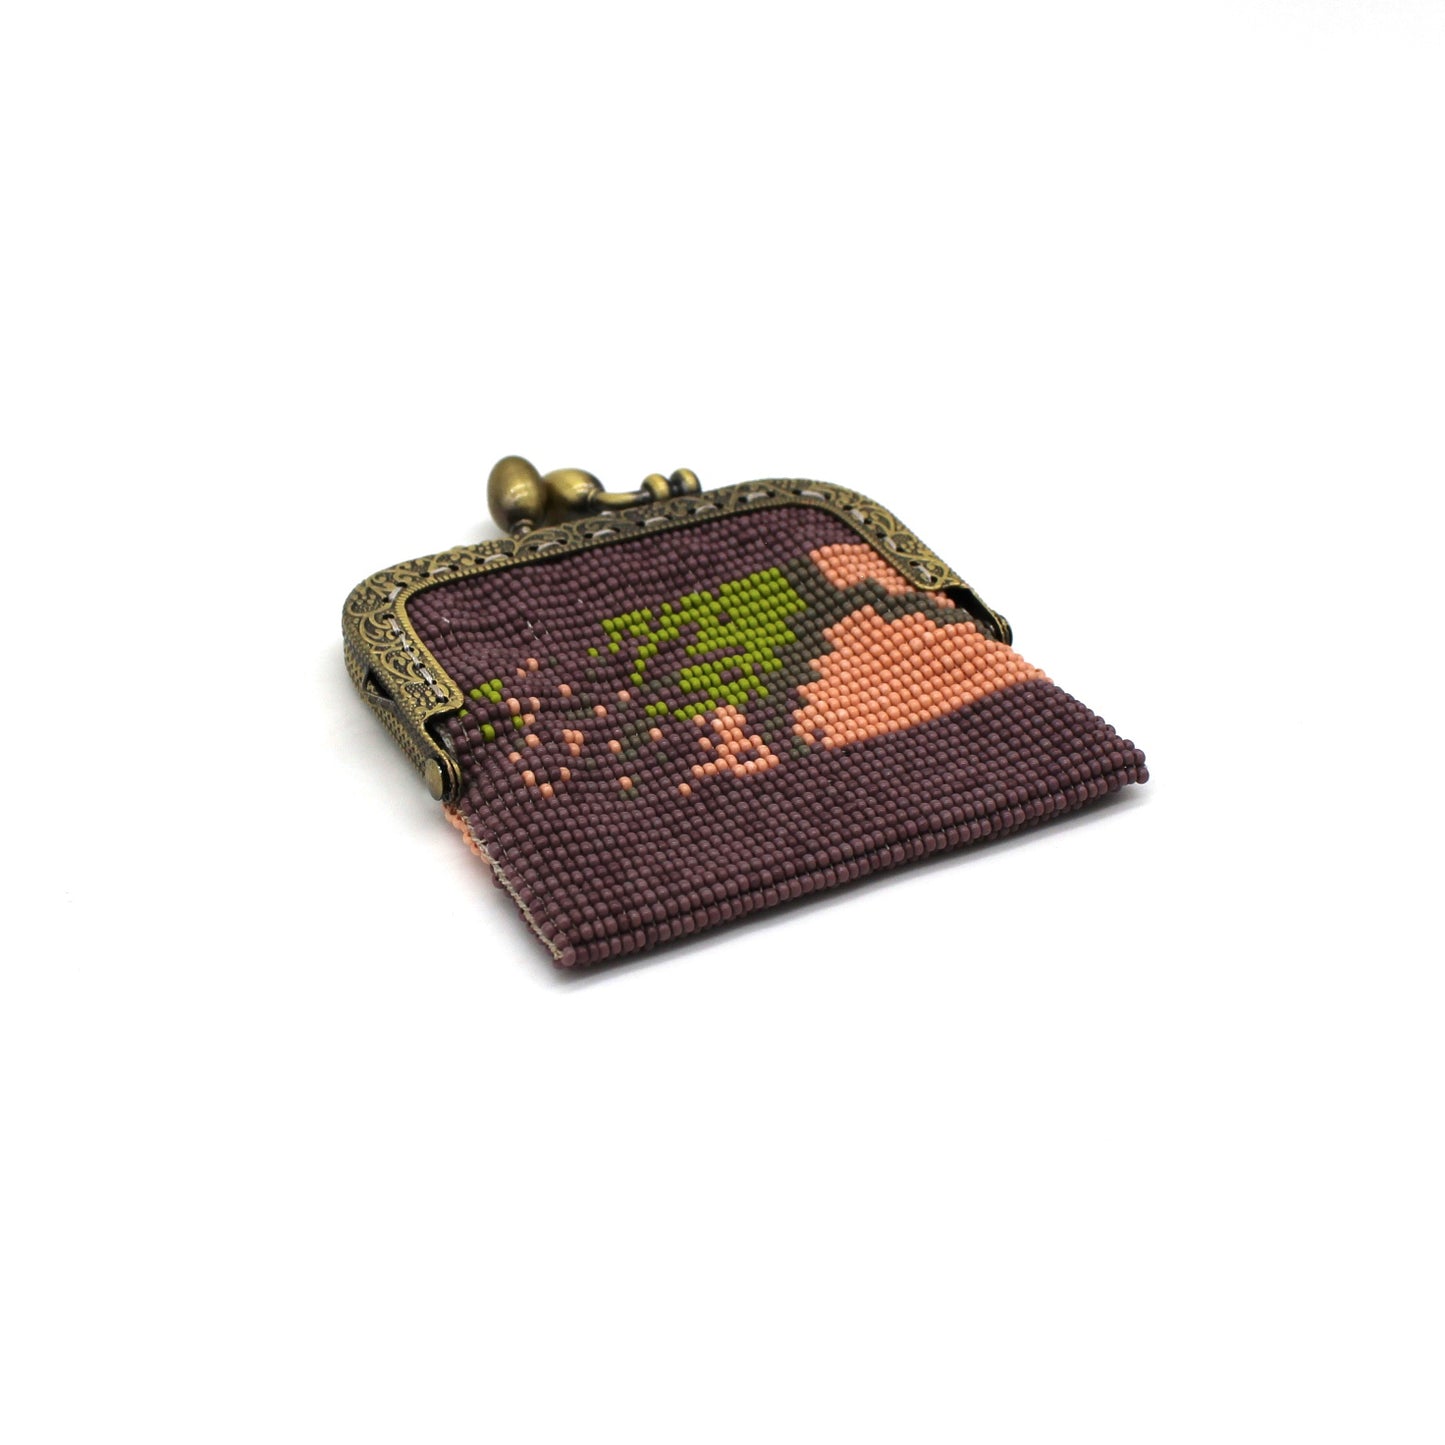 Glass bead coin purse with metal frame - Pyramid Lilac